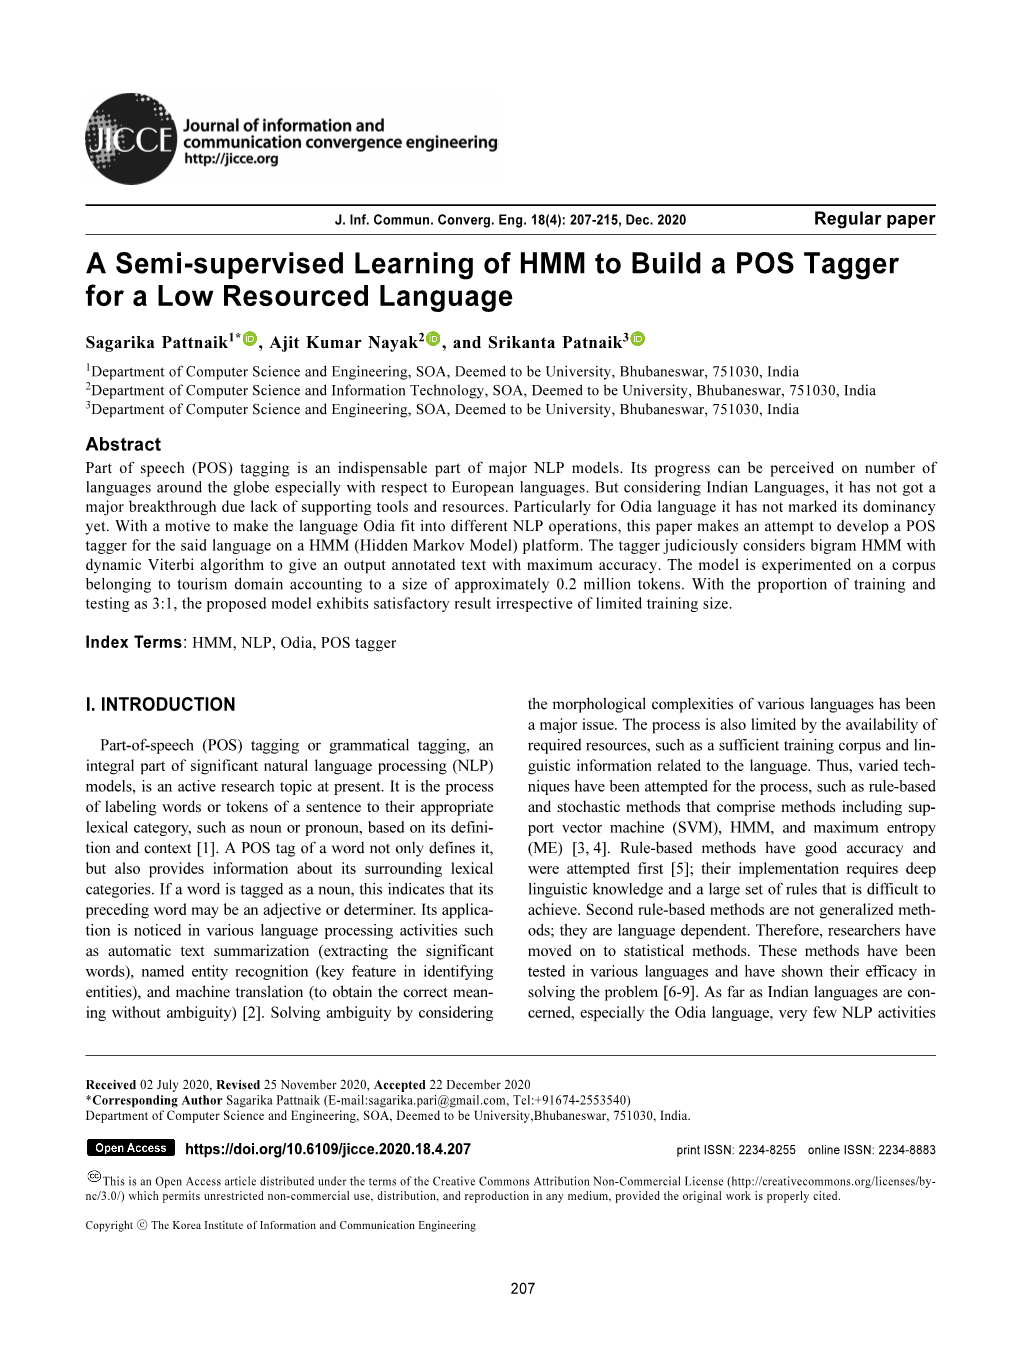 A Semi-Supervised Learning of HMM to Build a POS Tagger for a Low Resourced Language